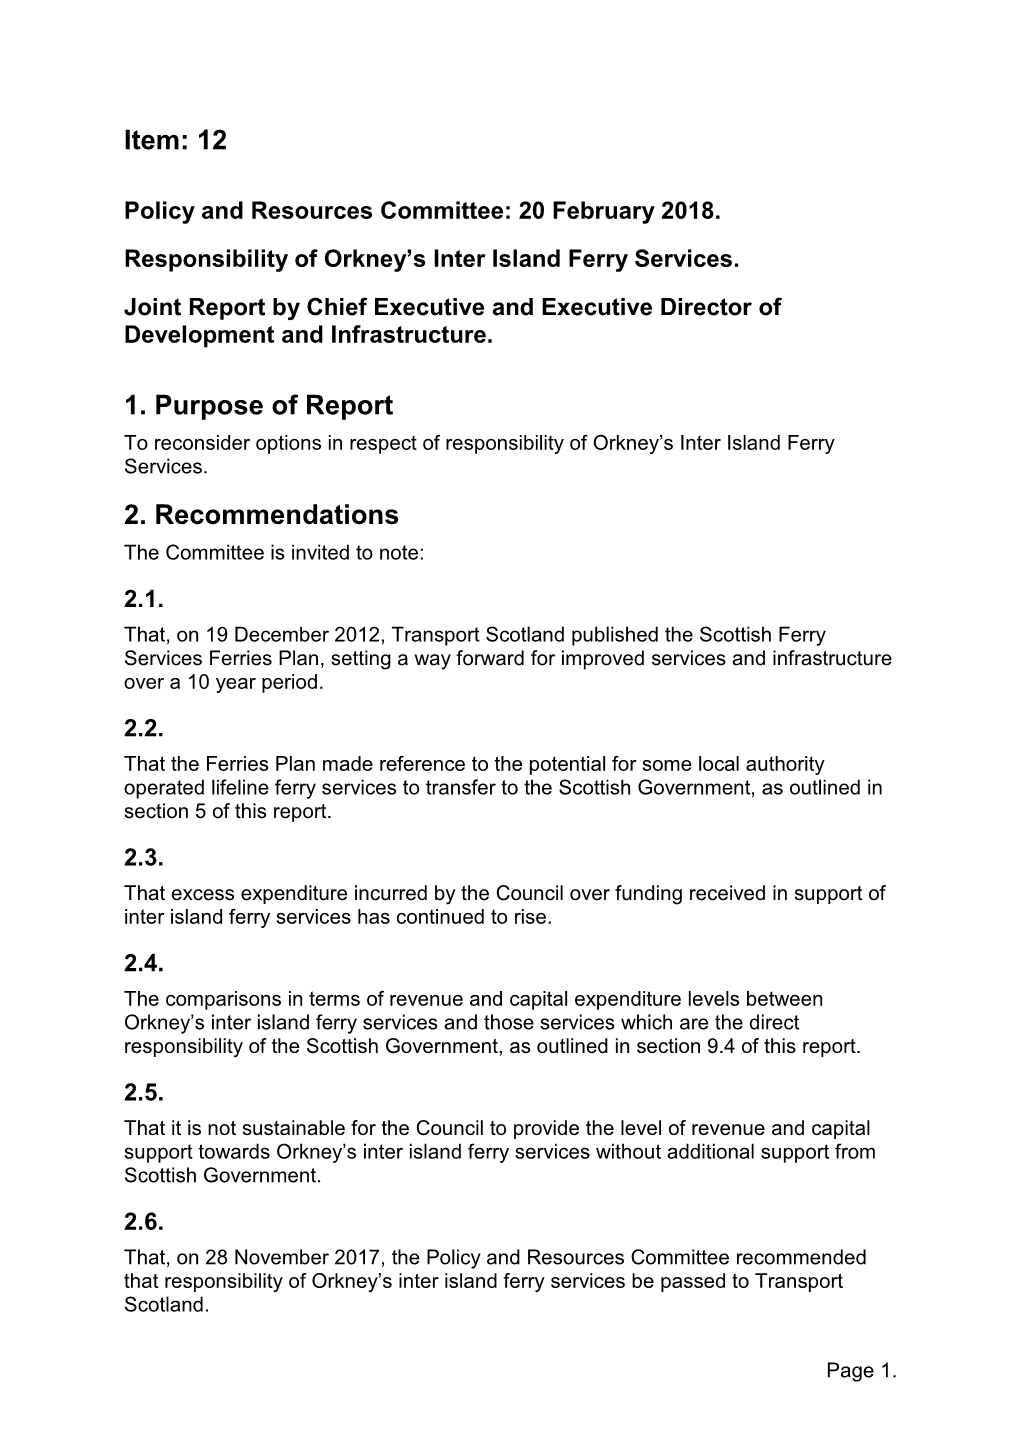 Item 12: Responsibility of Orkney's Inter Island Ferry Services